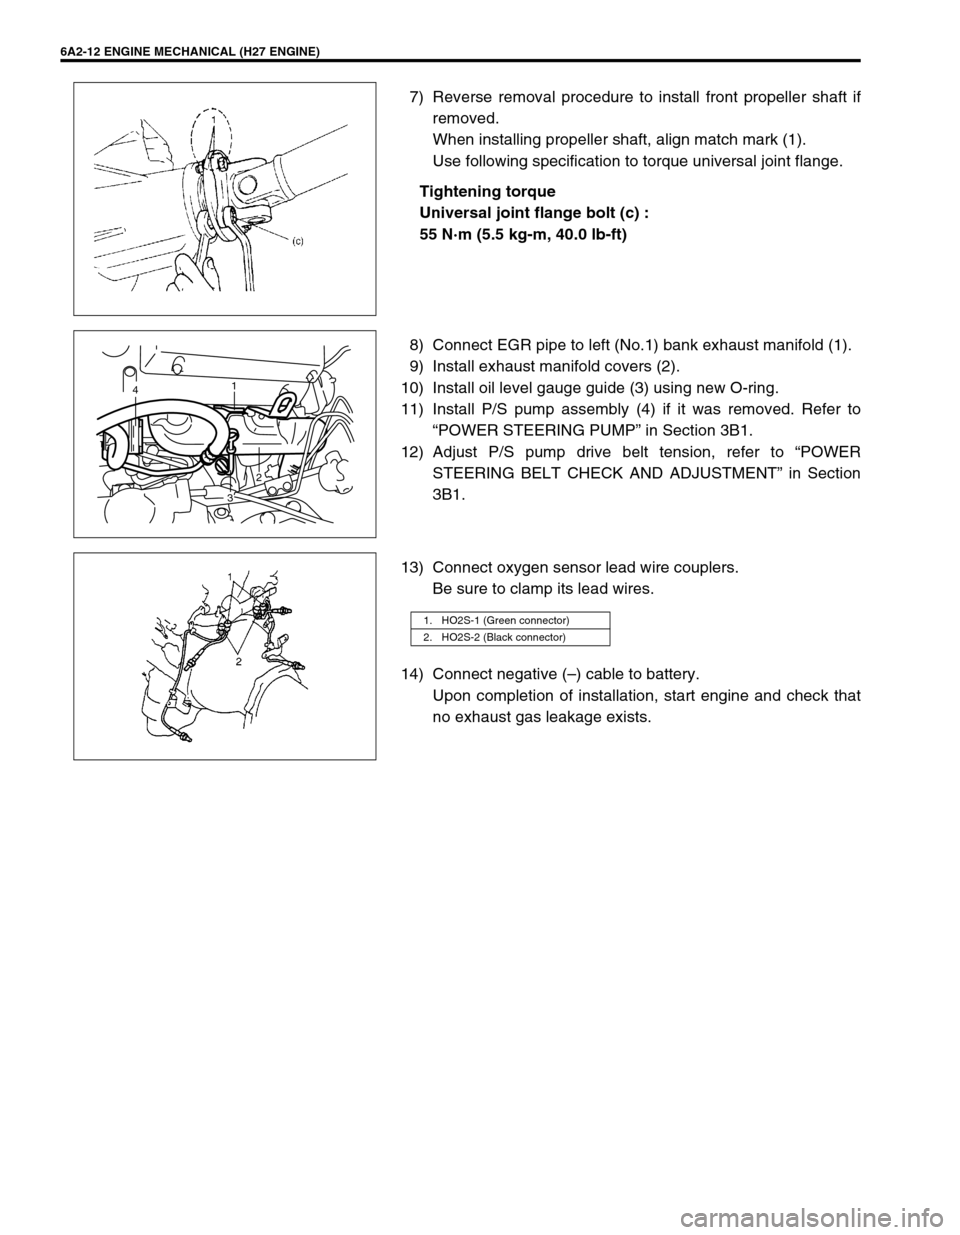 SUZUKI GRAND VITARA 2001 2.G Service Manual 6A2-12 ENGINE MECHANICAL (H27 ENGINE)
7) Reverse removal procedure to install front propeller shaft if
removed.
When installing propeller shaft, align match mark (1).
Use following specification to to